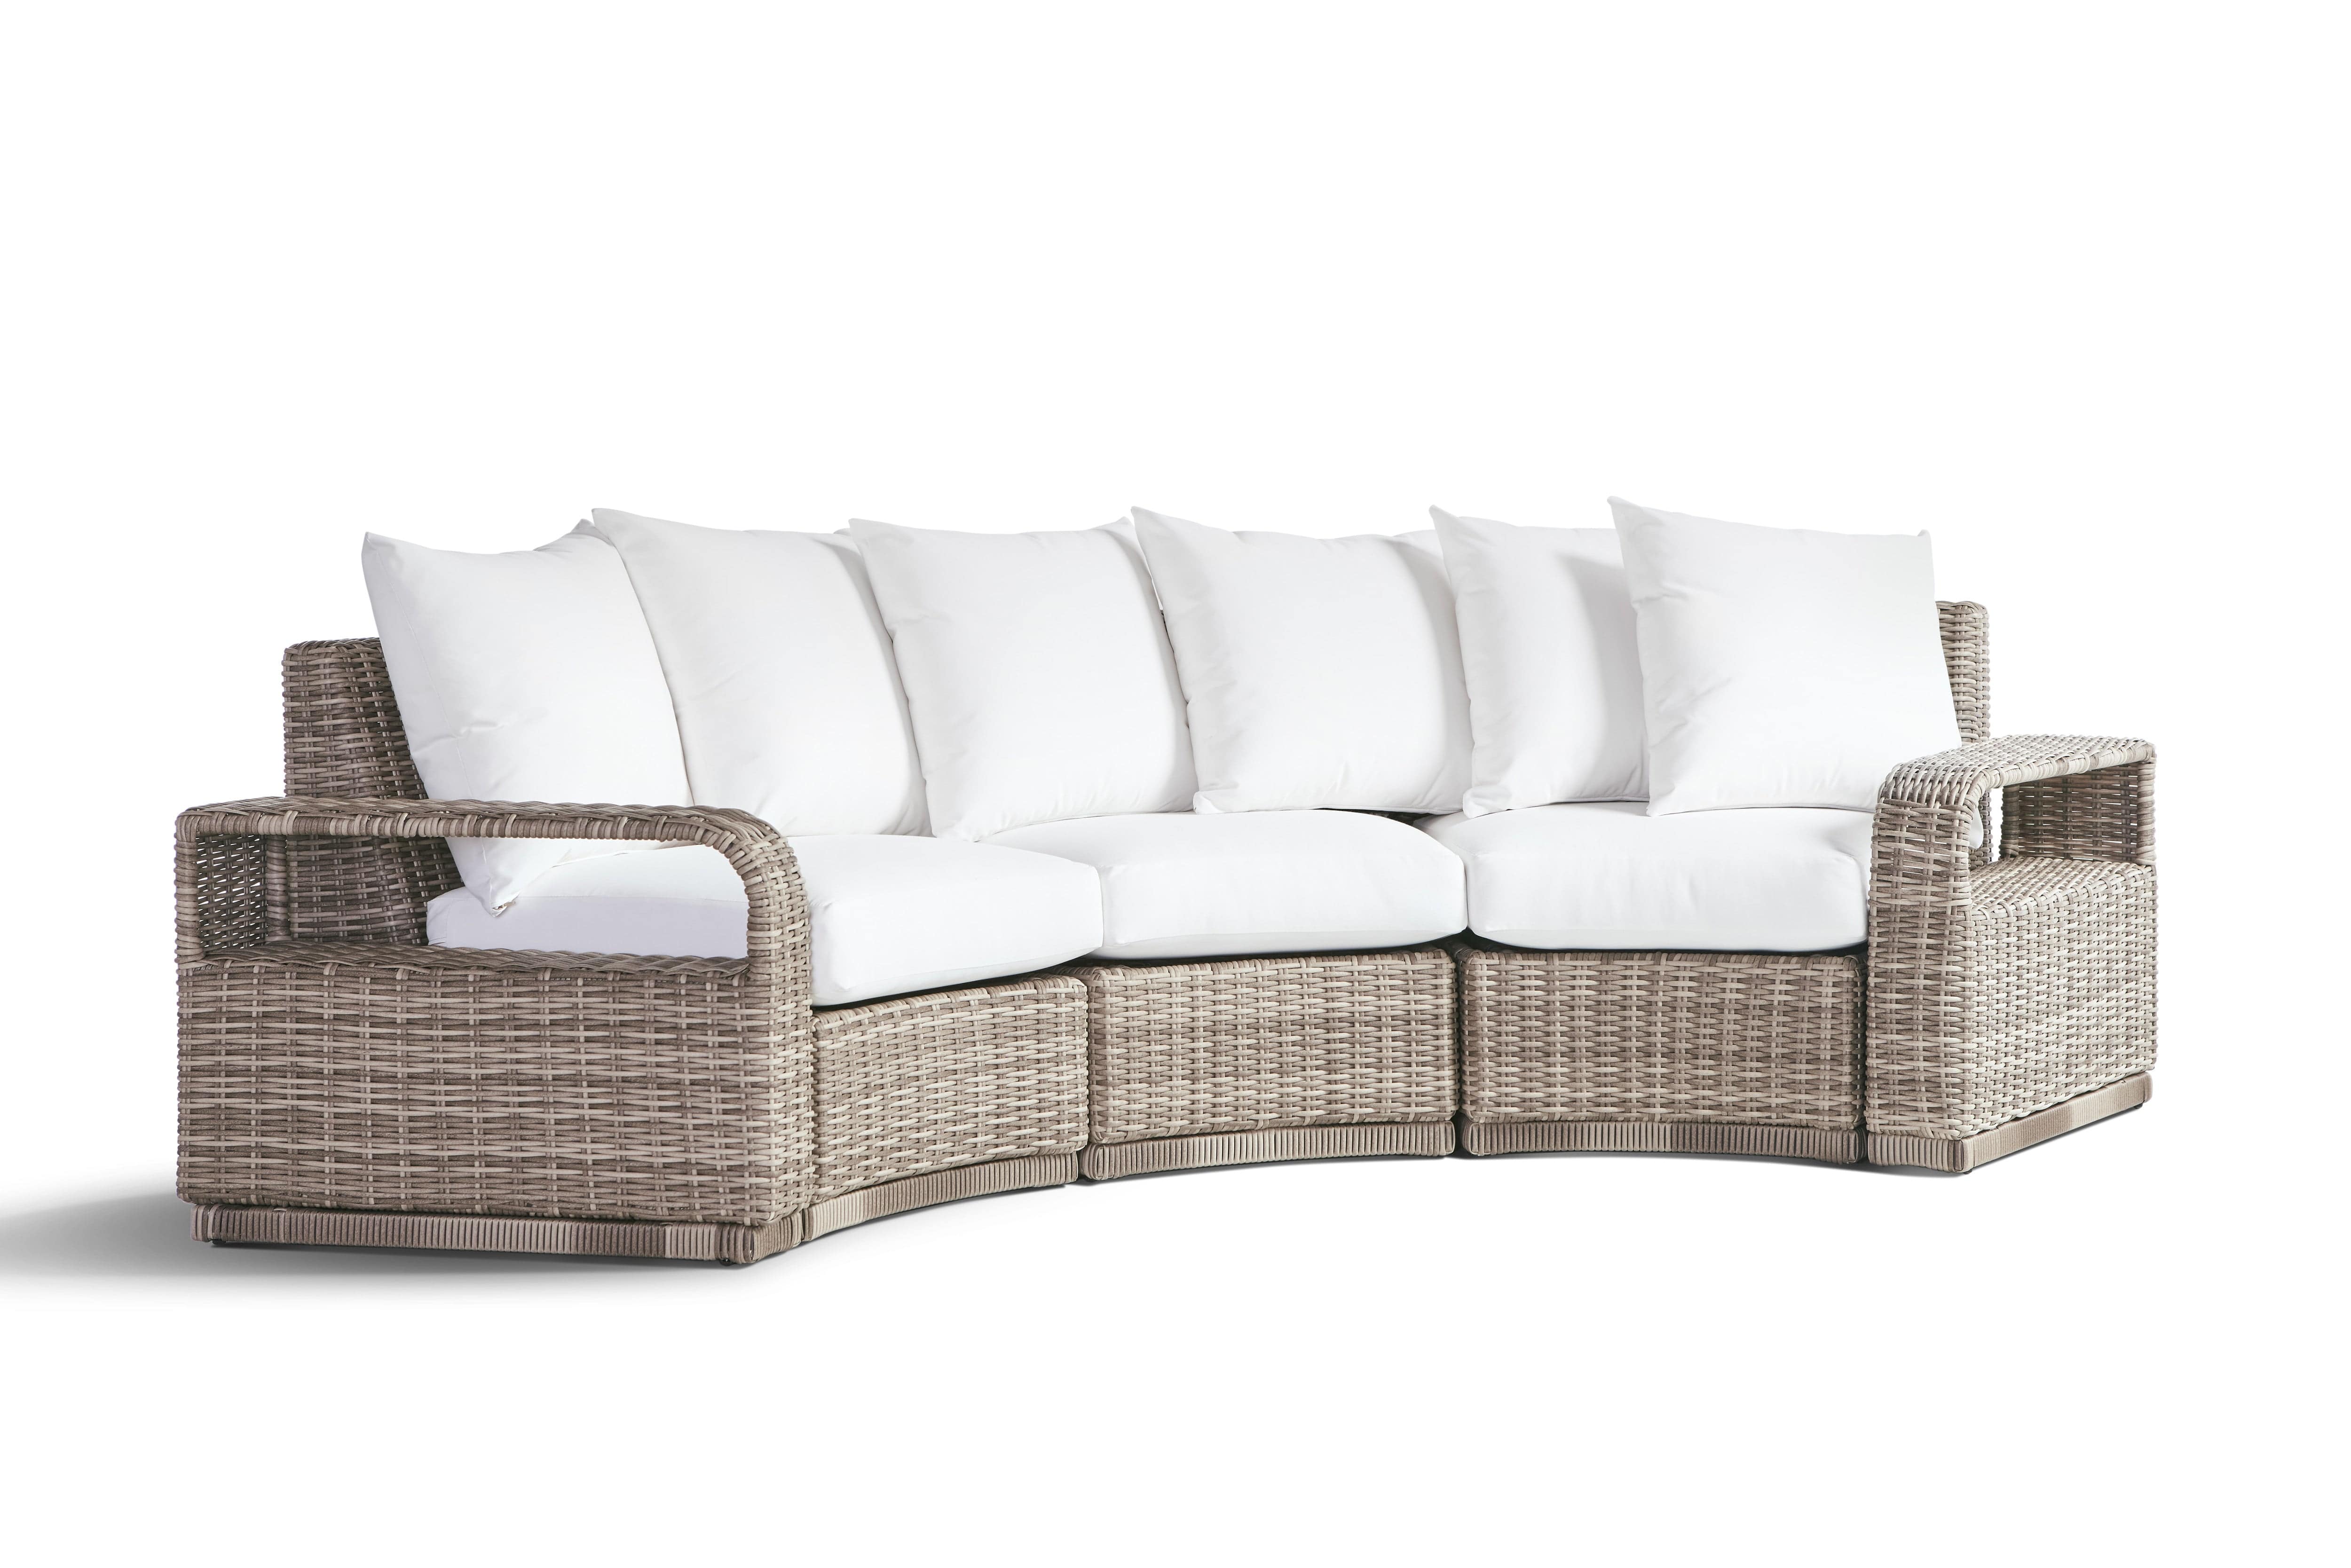 South Sea Outdoor Living Outdoor Sectional Luna Cove Scatter-Back Sectional by South Sea Outdoor Living - 74300